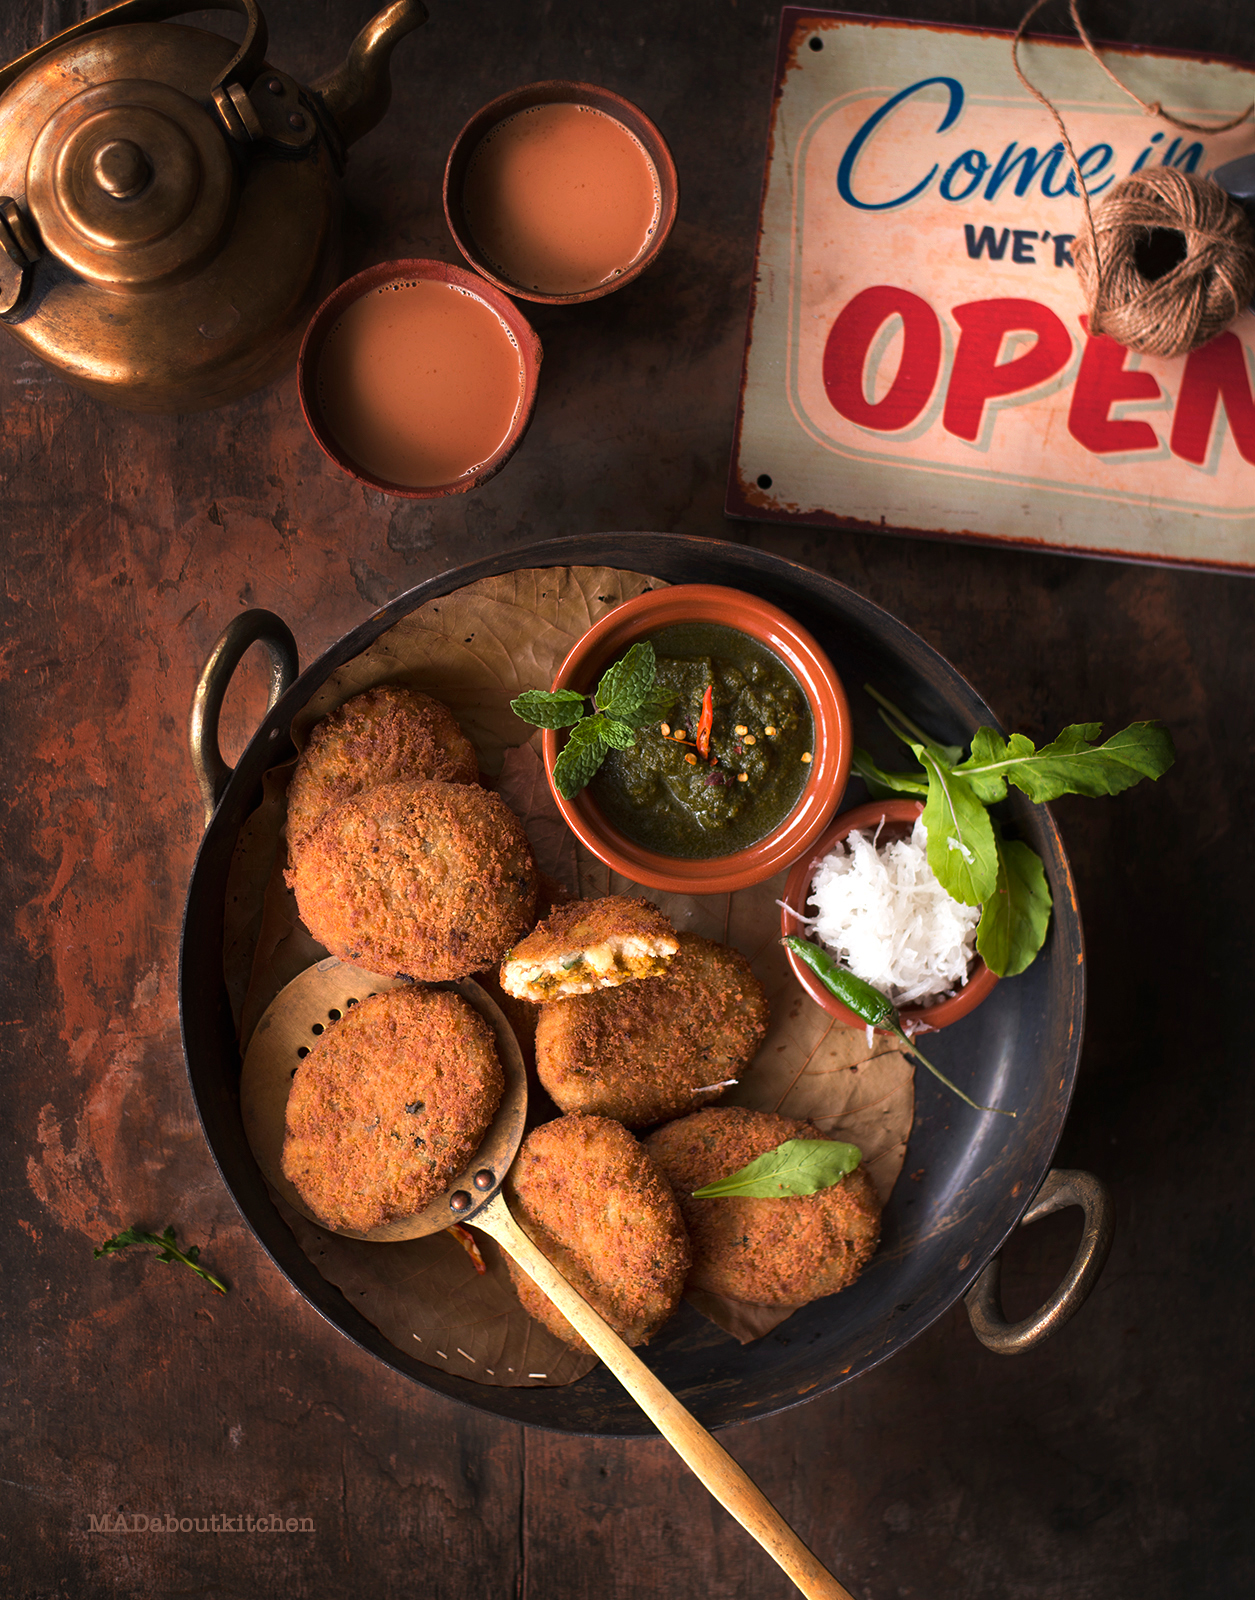 Chana Dal Tikki are cutlets stuffed with spicy lentil mixture which are perfect for this weather. These spicy patties are perfect teatime snack.